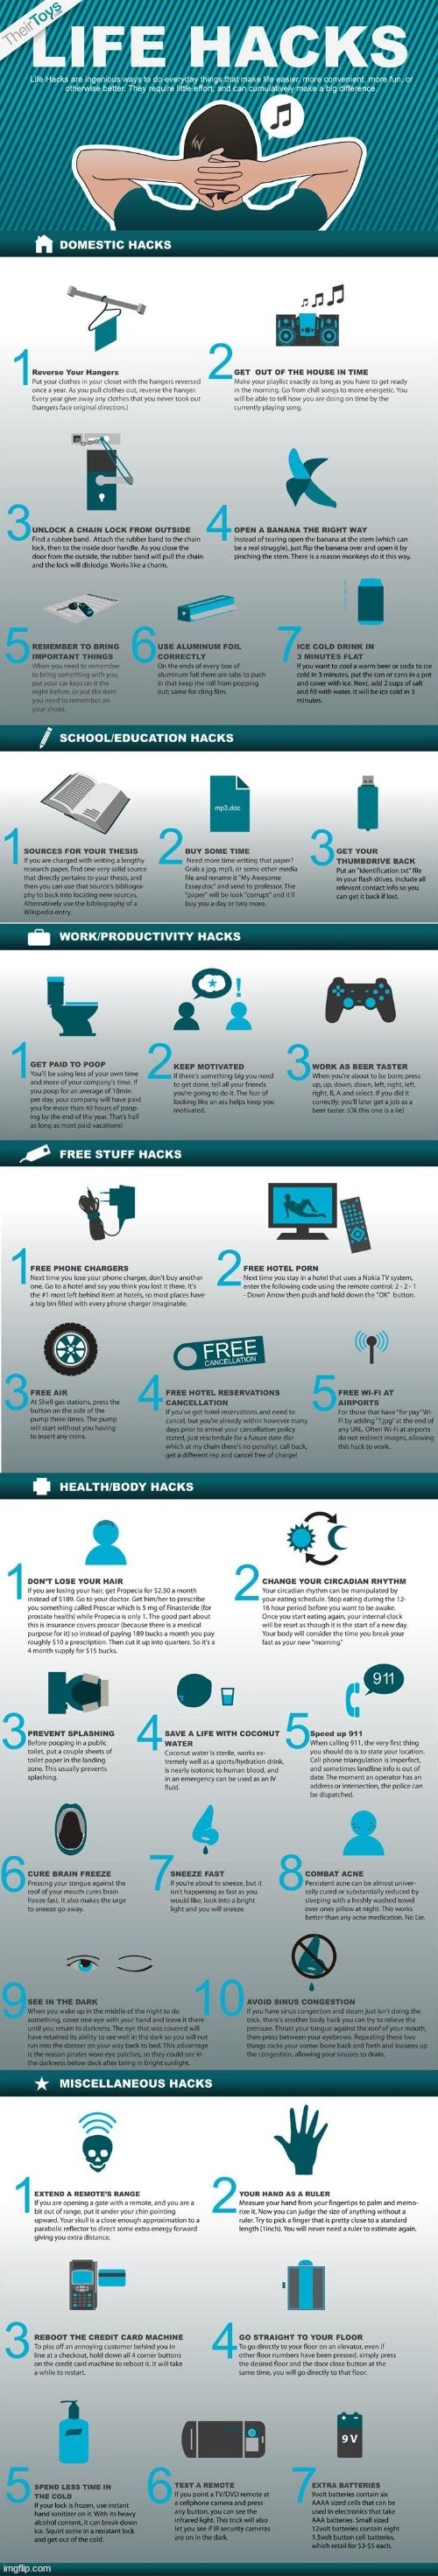 LIFE-HACKS COMPILATION Infographic (All-Purpose) By SimoTheFinlandized - 2022 CE | image tagged in simothefinlandized,life hack,compilation,infographic,all-purpose | made w/ Imgflip meme maker